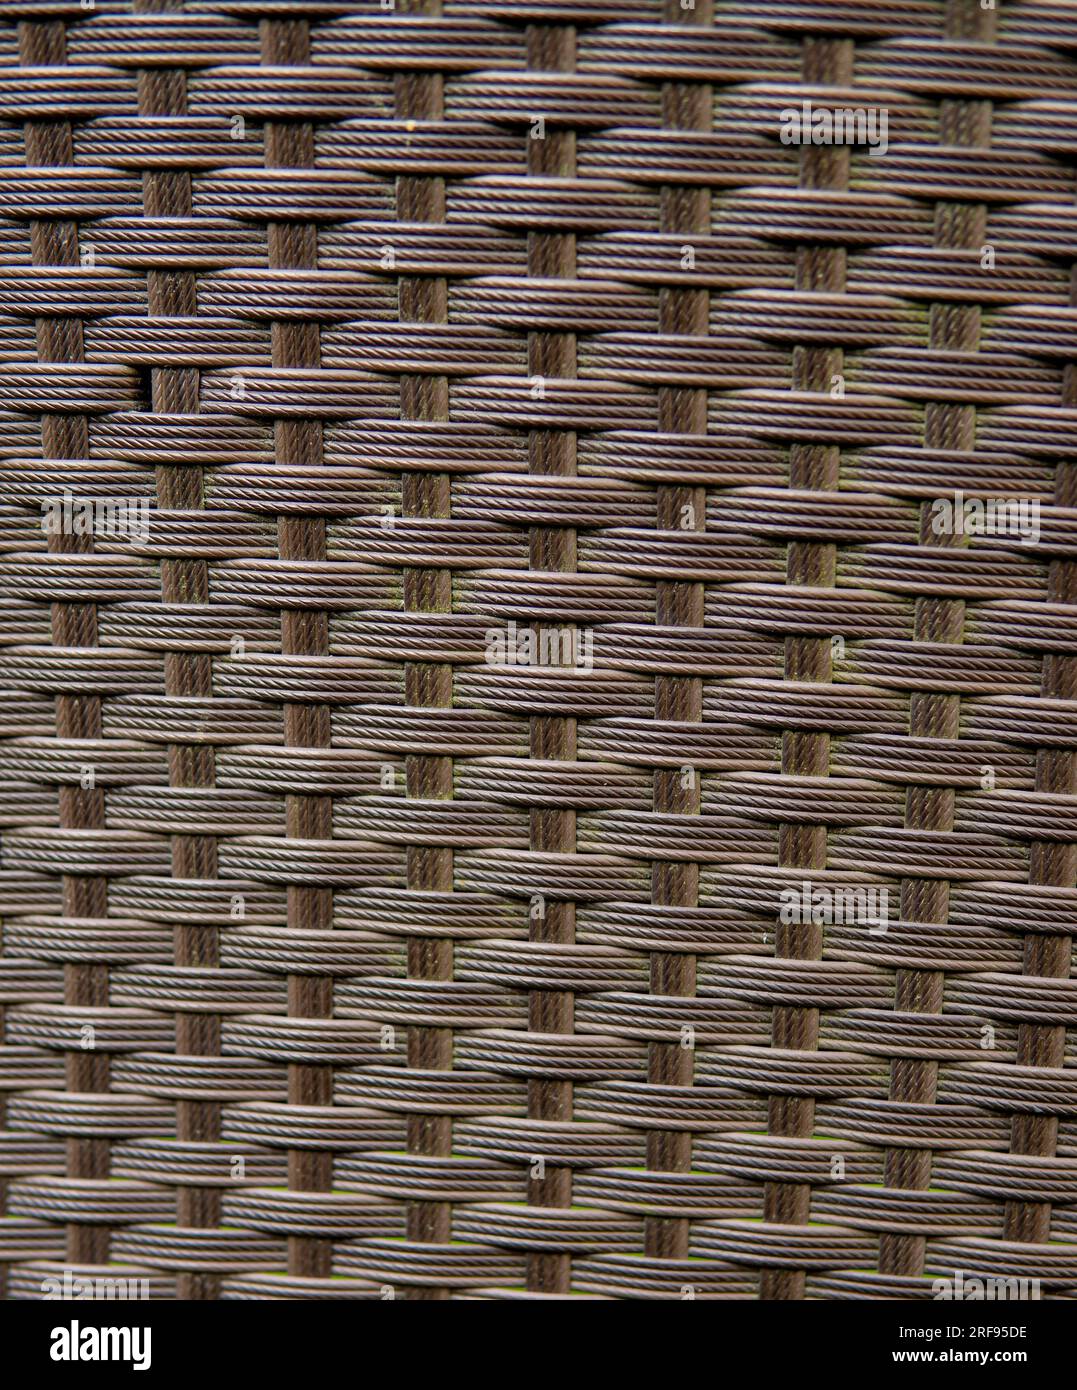 detail of texture created from vertical and horizontal lines Stock Photo